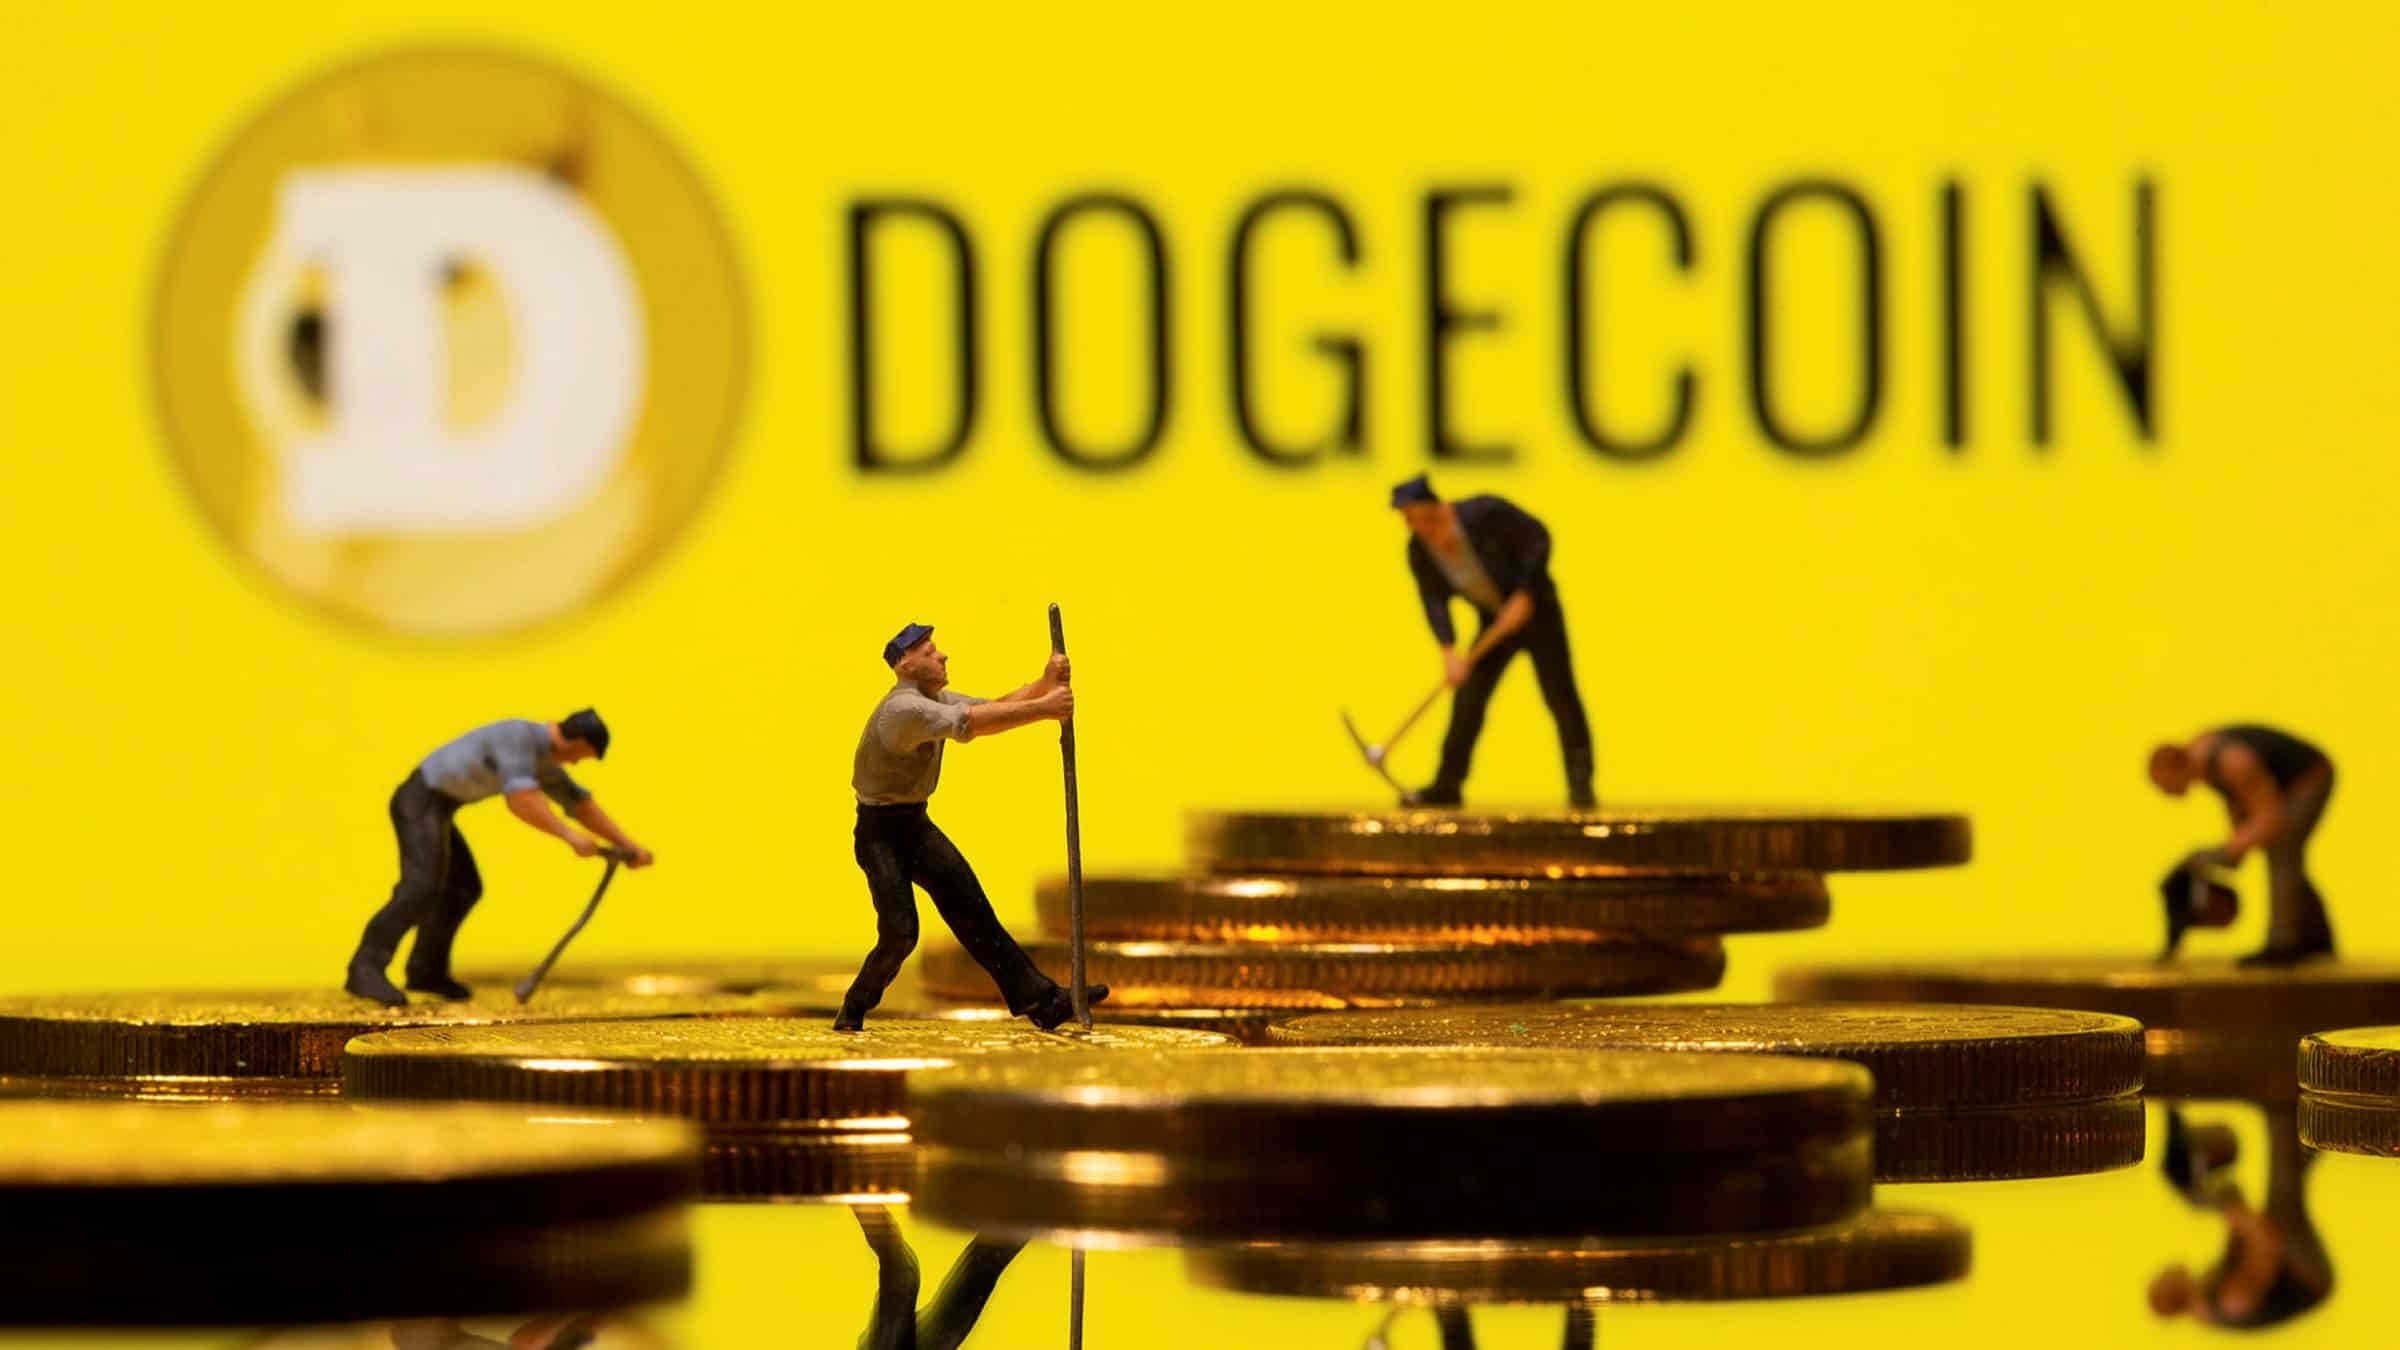 Dogecoin leads crypto chatter on social media following Bitcoin